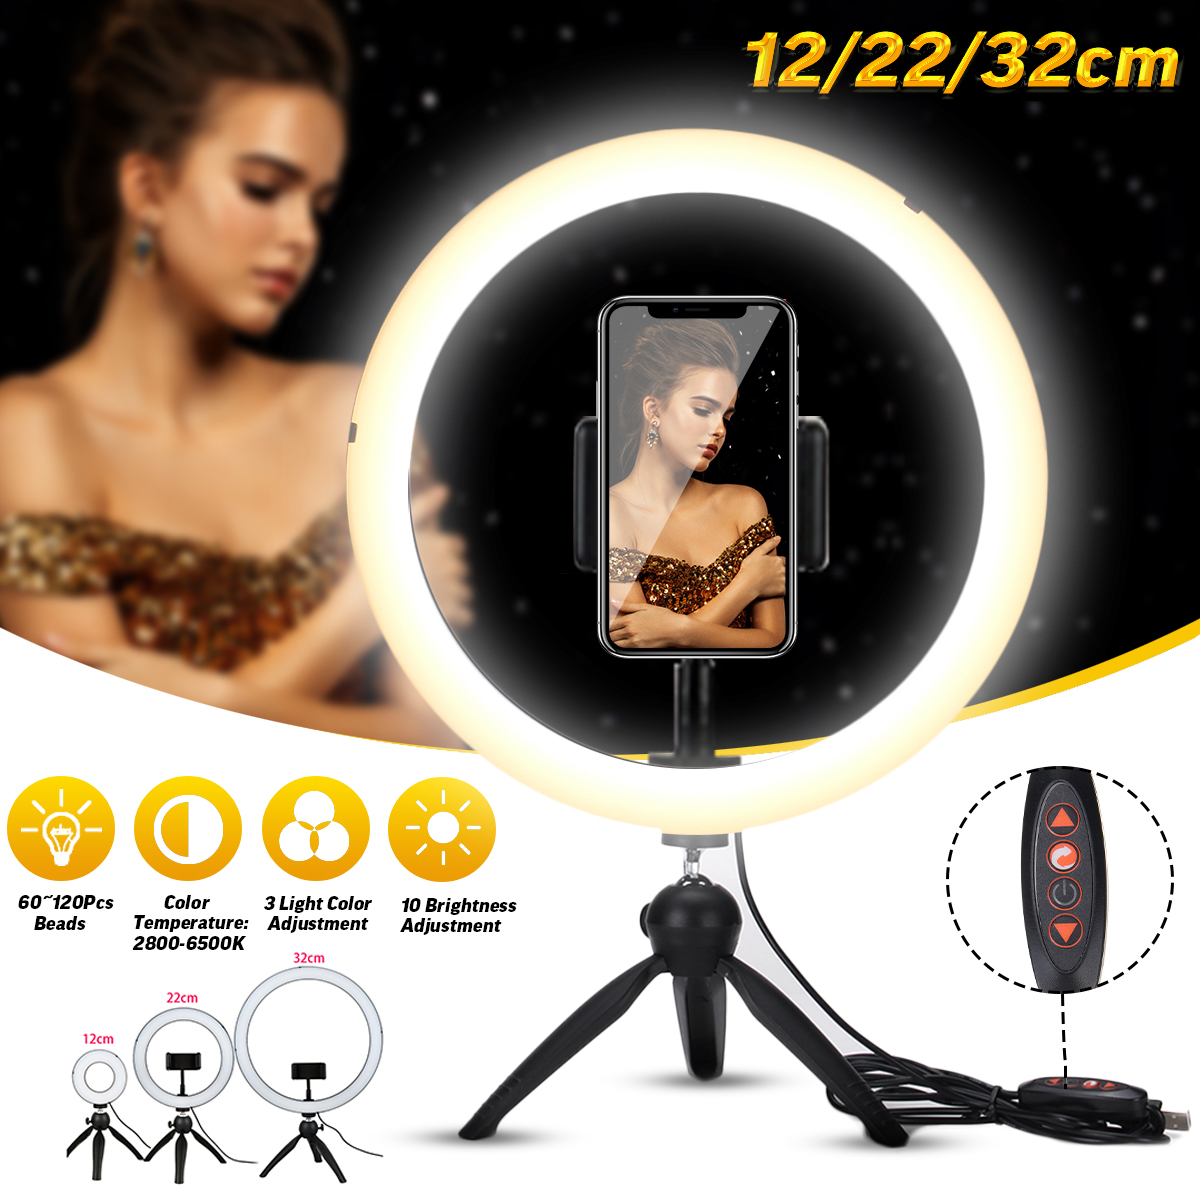 Ring-Light-LED-Makeup-Ring-Lamp-USB-Portable-Selfie-Ring-Lamp-Phone-Holder-Tripod-Stand-Photography--1579907-4